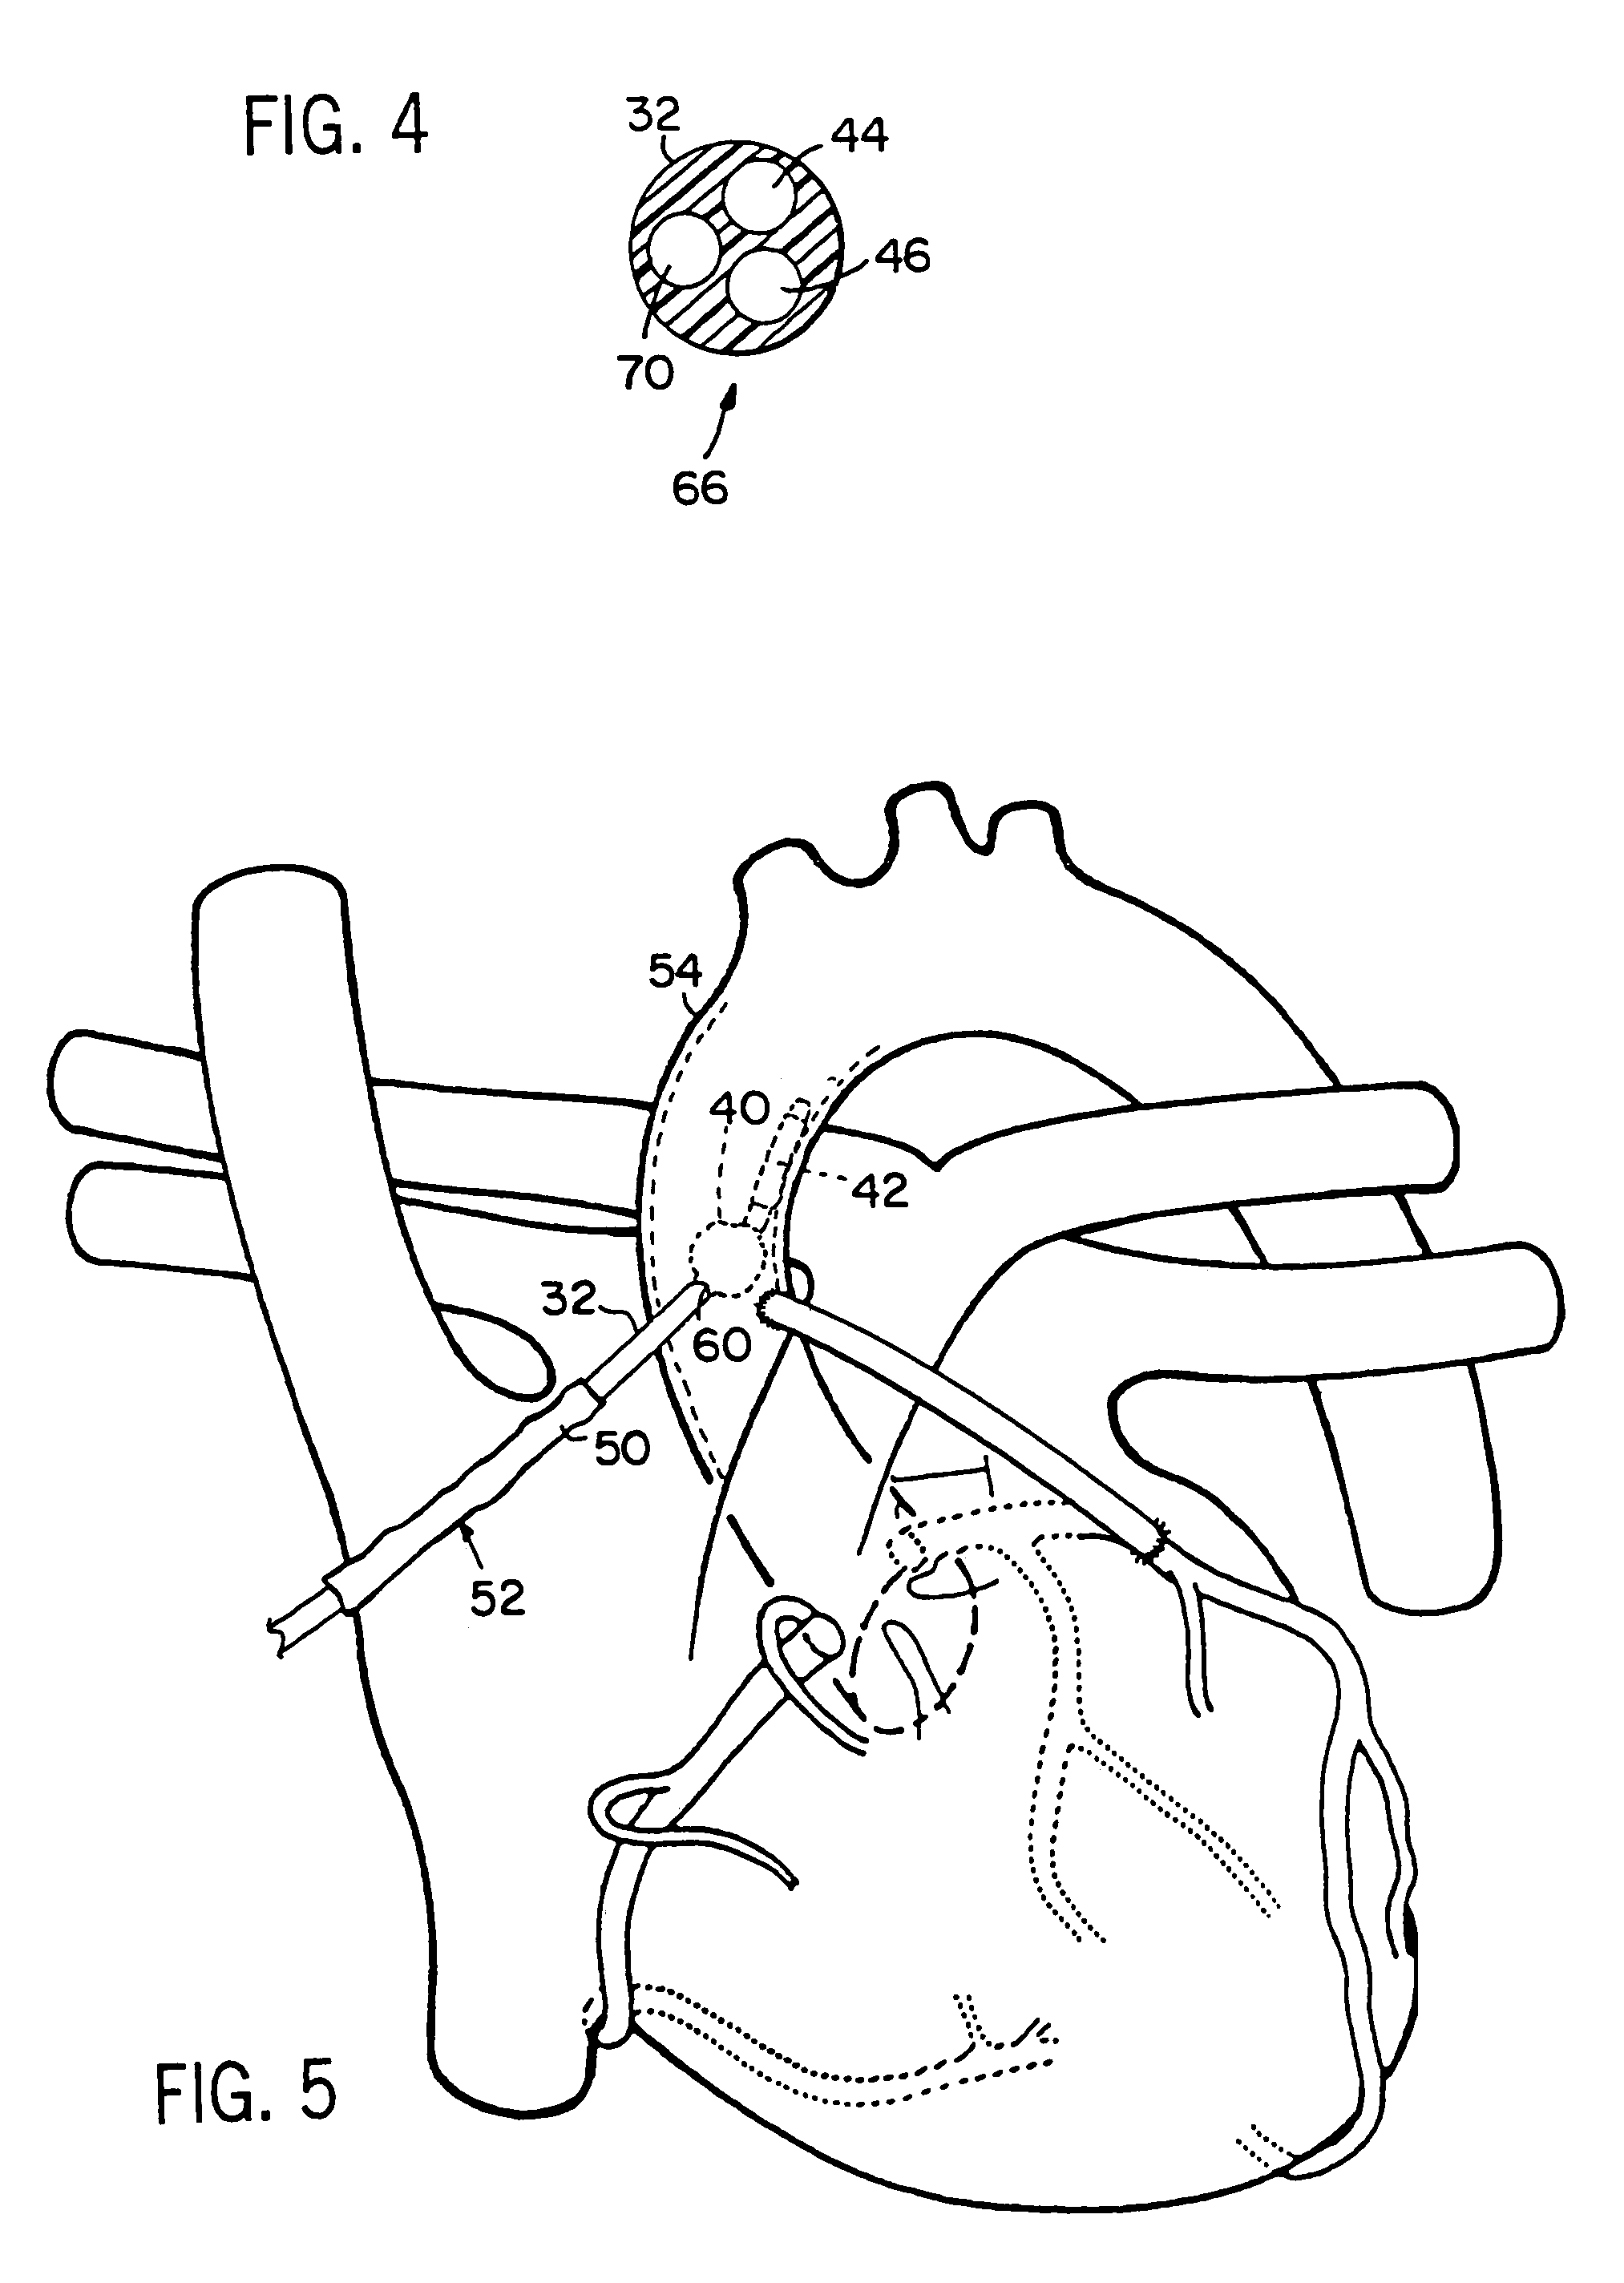 Intravascular balloon occlusion device and method for using the same